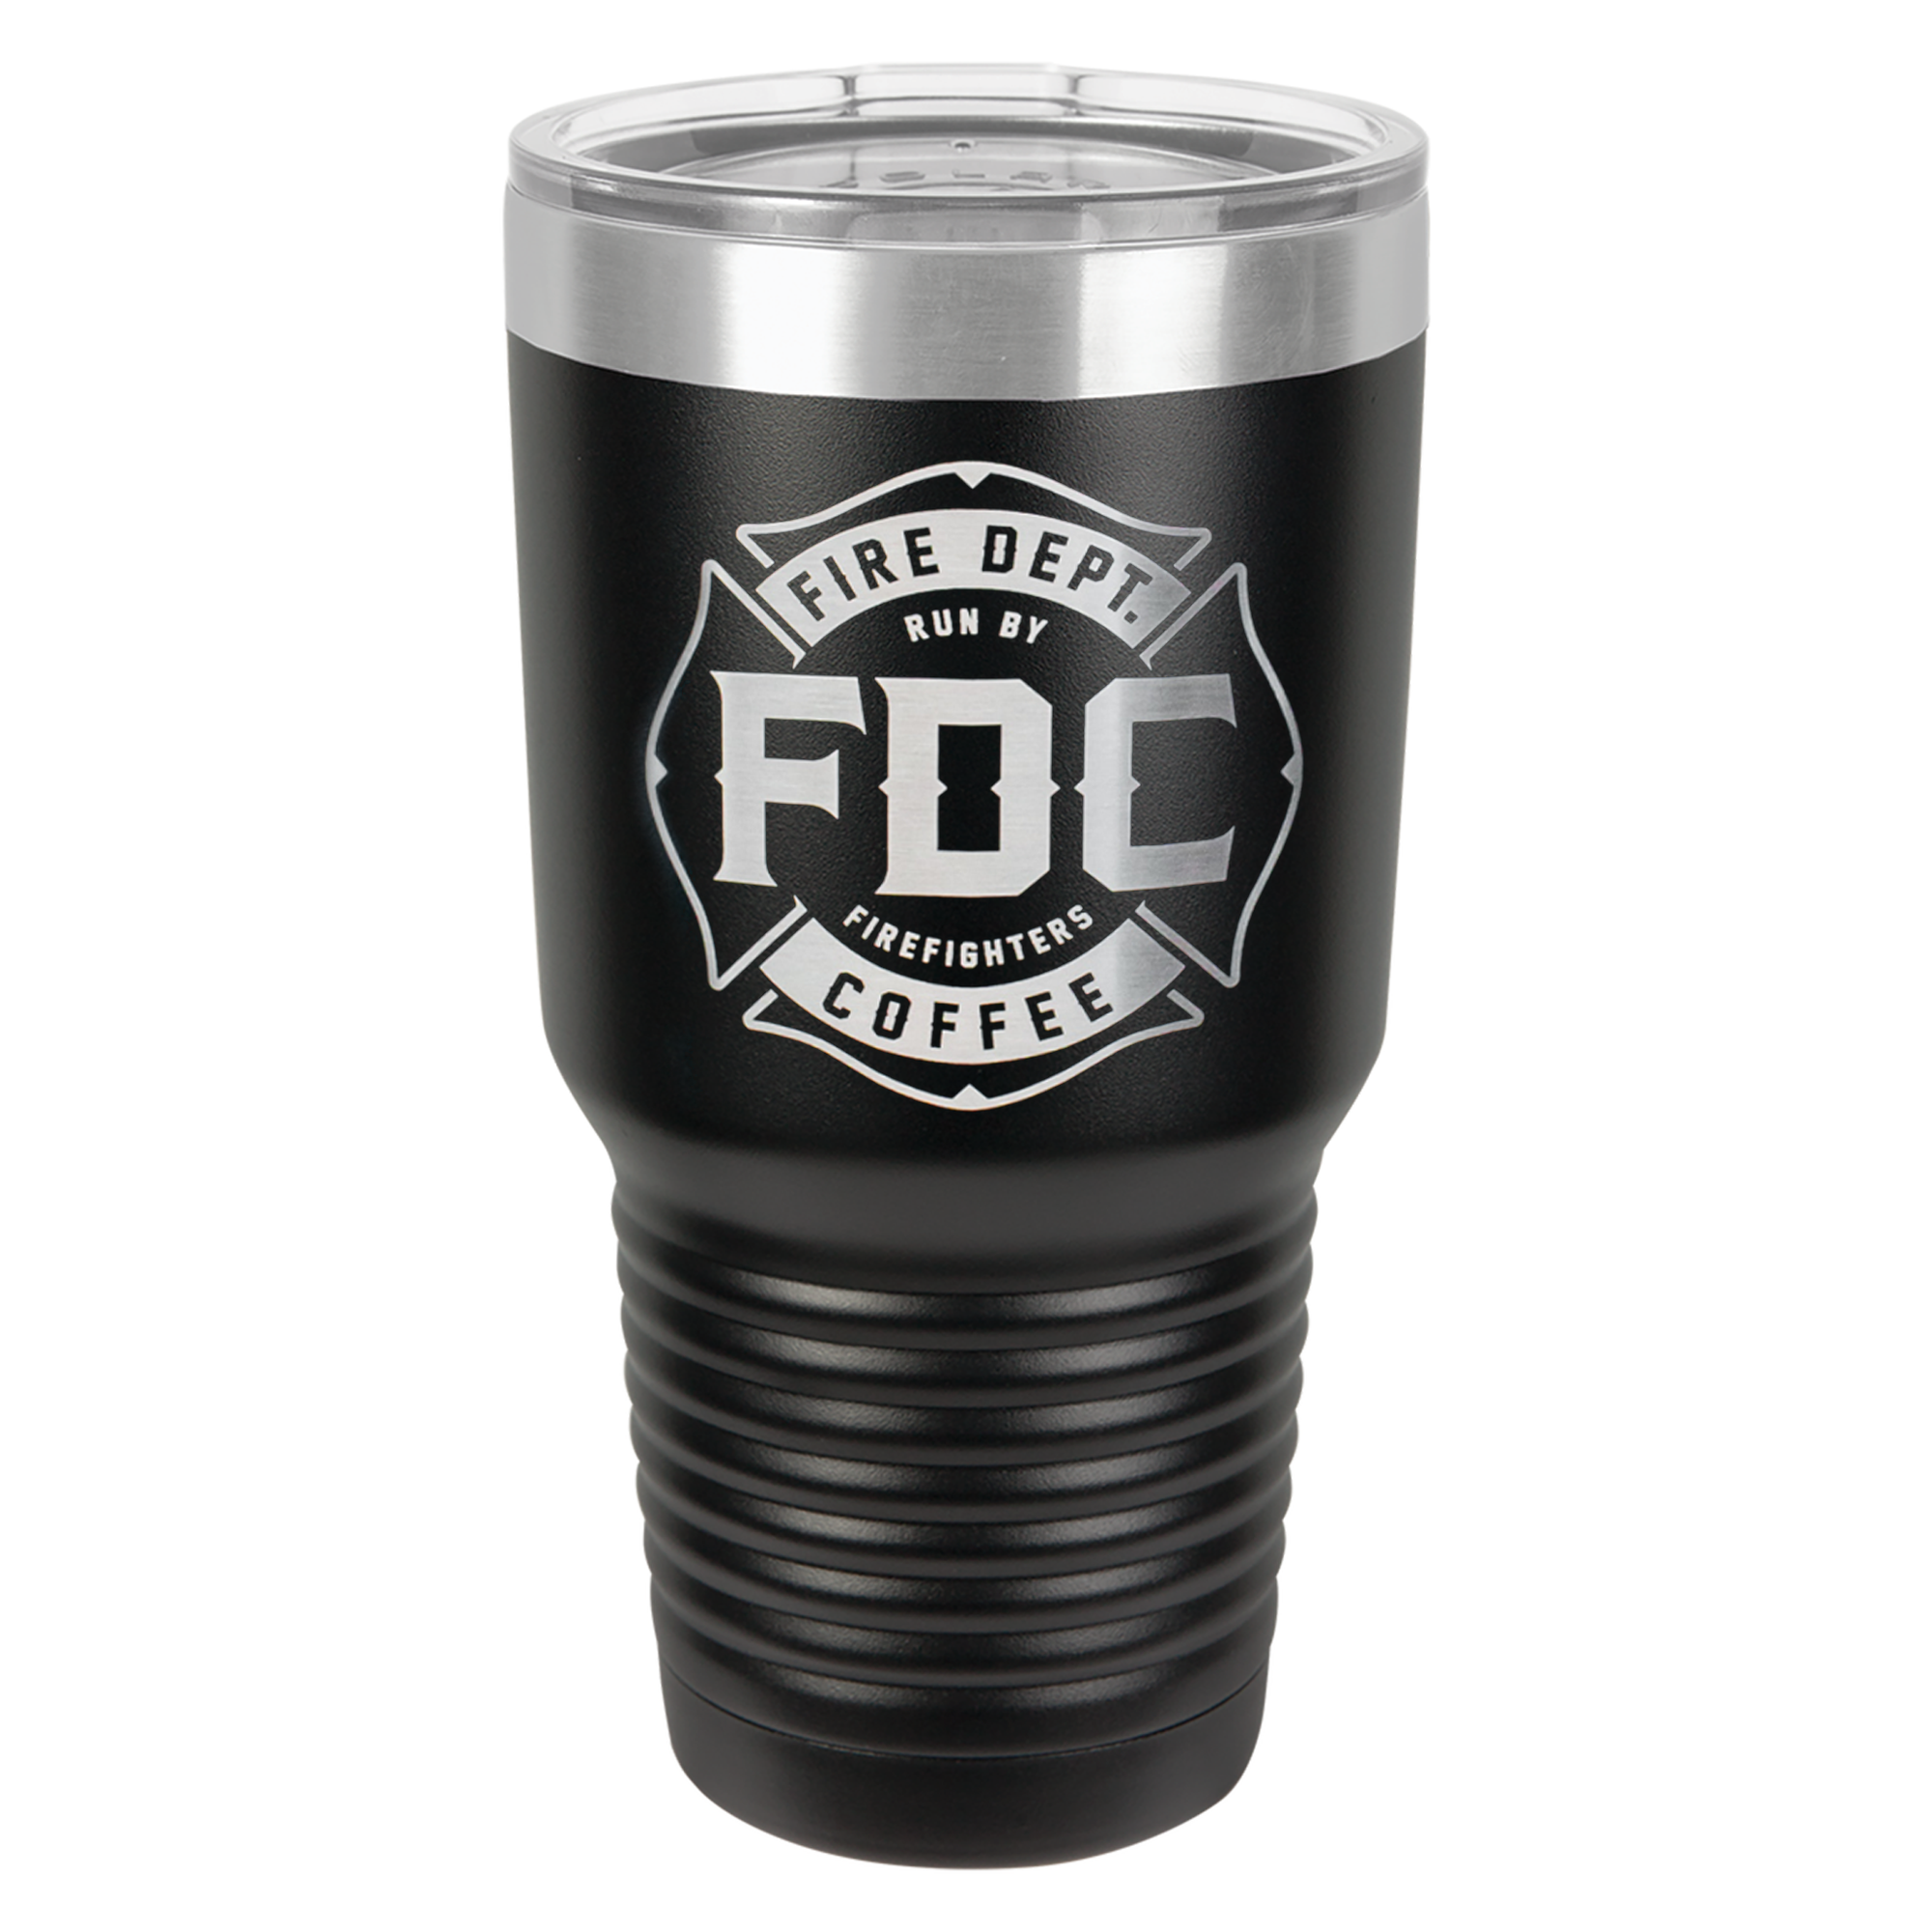 A black Fire Dept. Coffee tumbler with the company's maltese cross logo featured prominently.